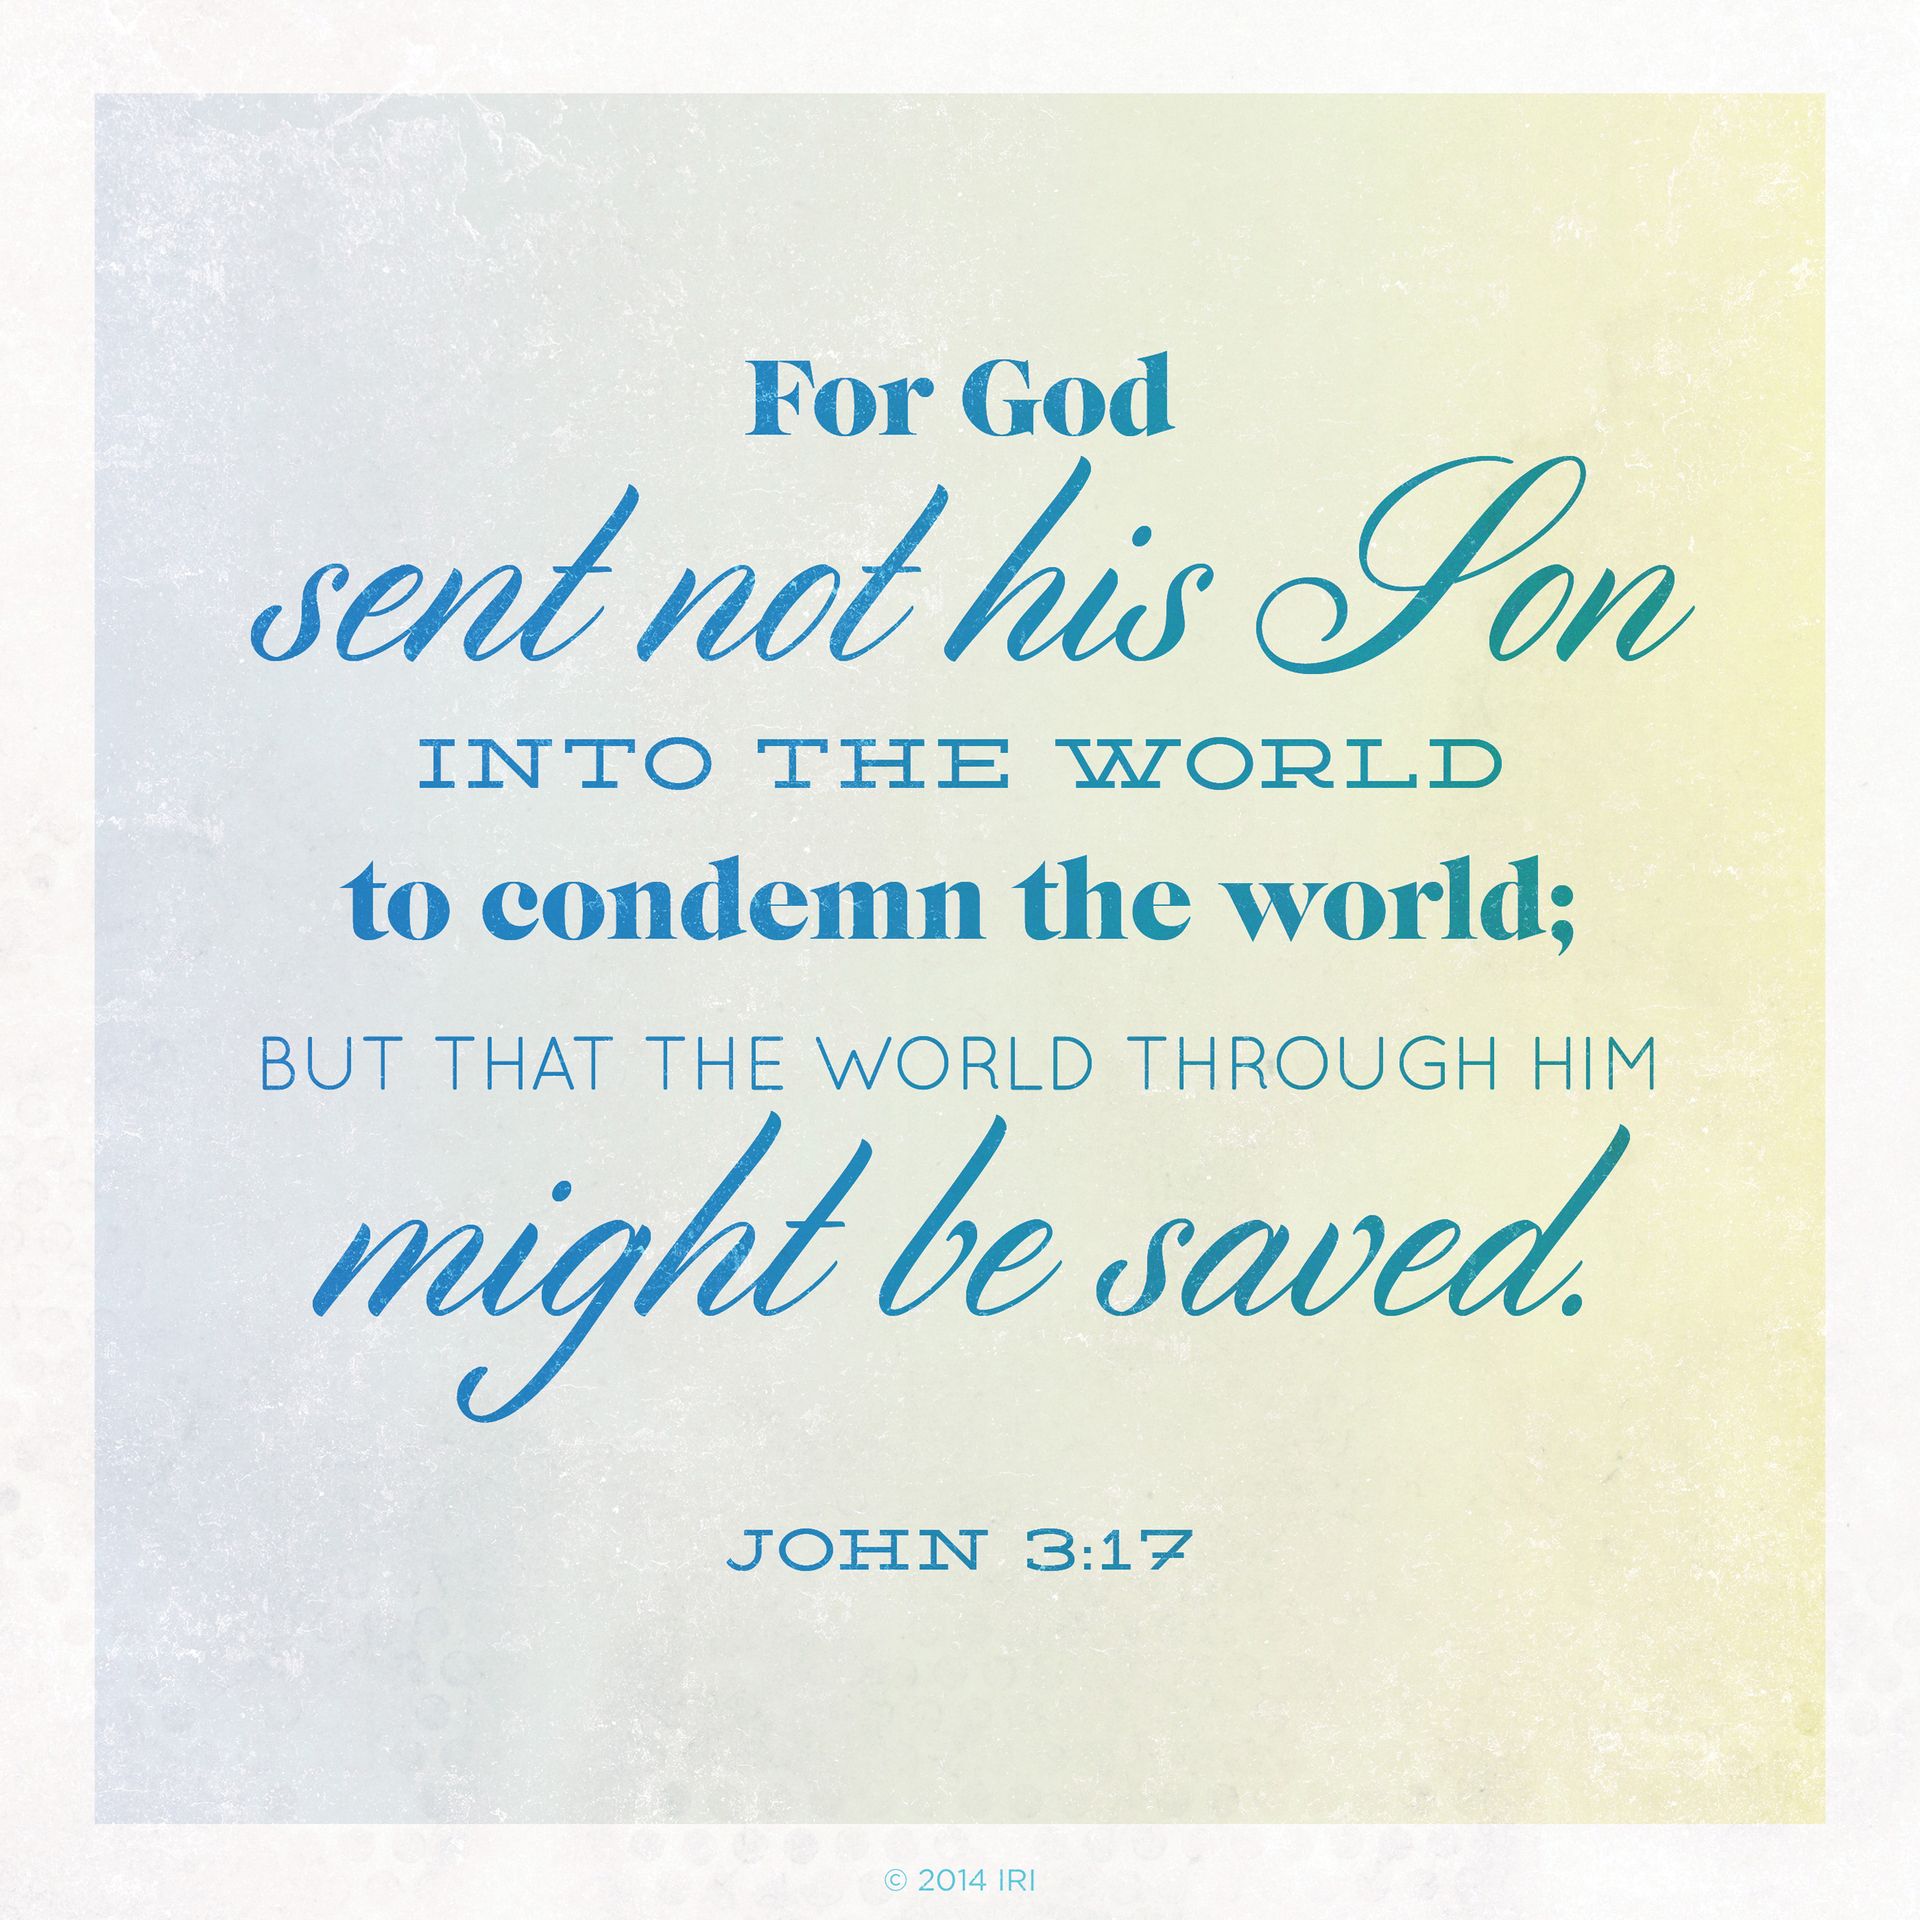 “For God sent not his Son into the world to condemn the world; but that the world through him might be saved.” —John 3:17